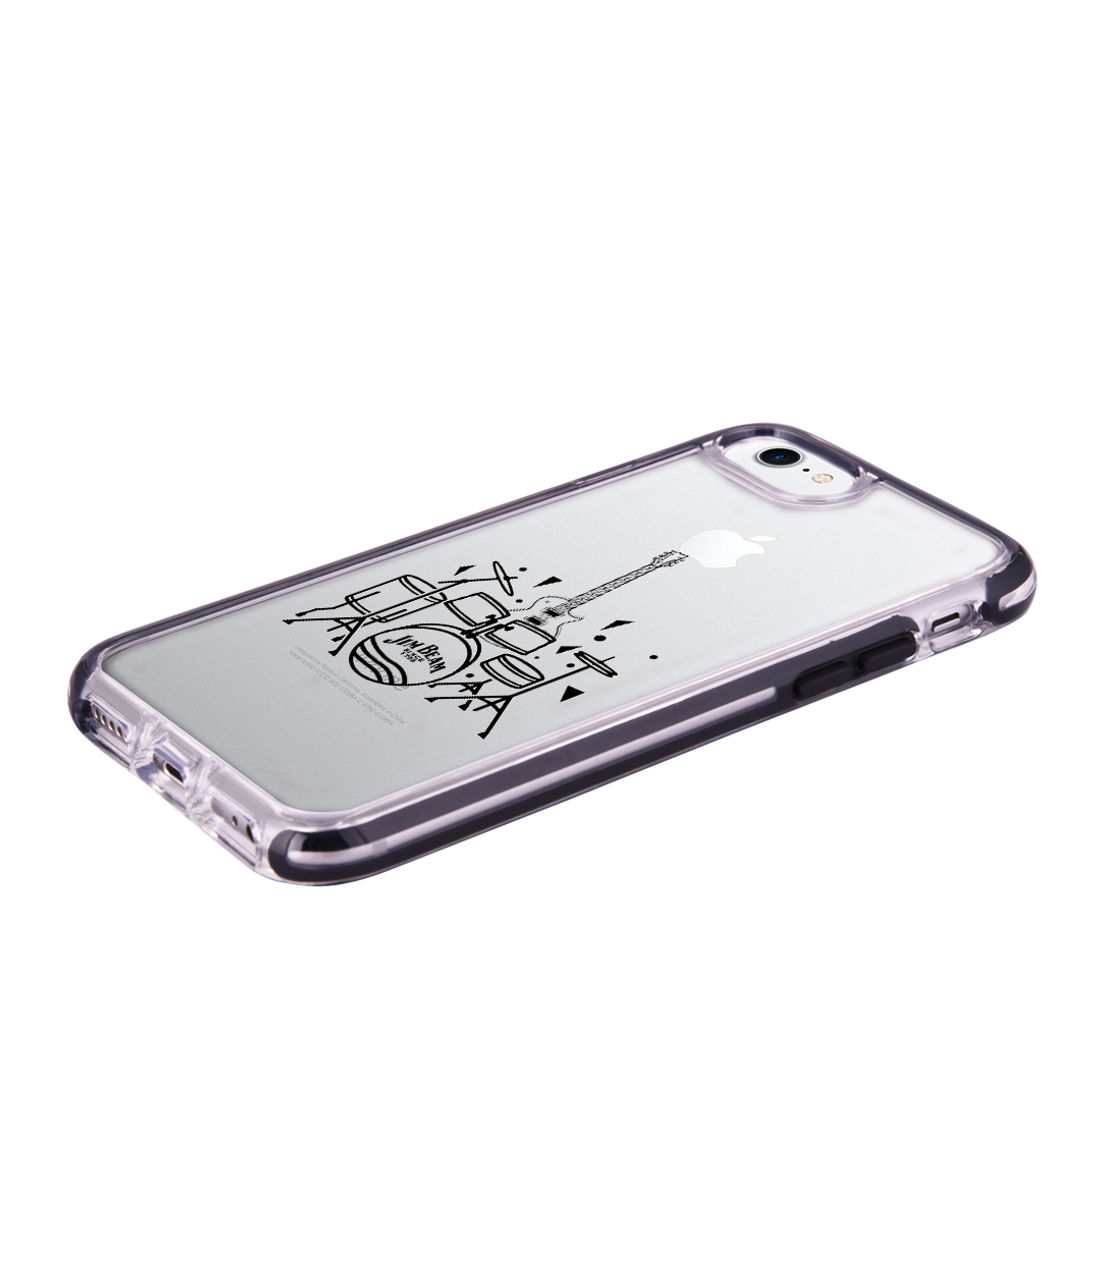 Jim Beam The Band - Shield Case for iPhone 8